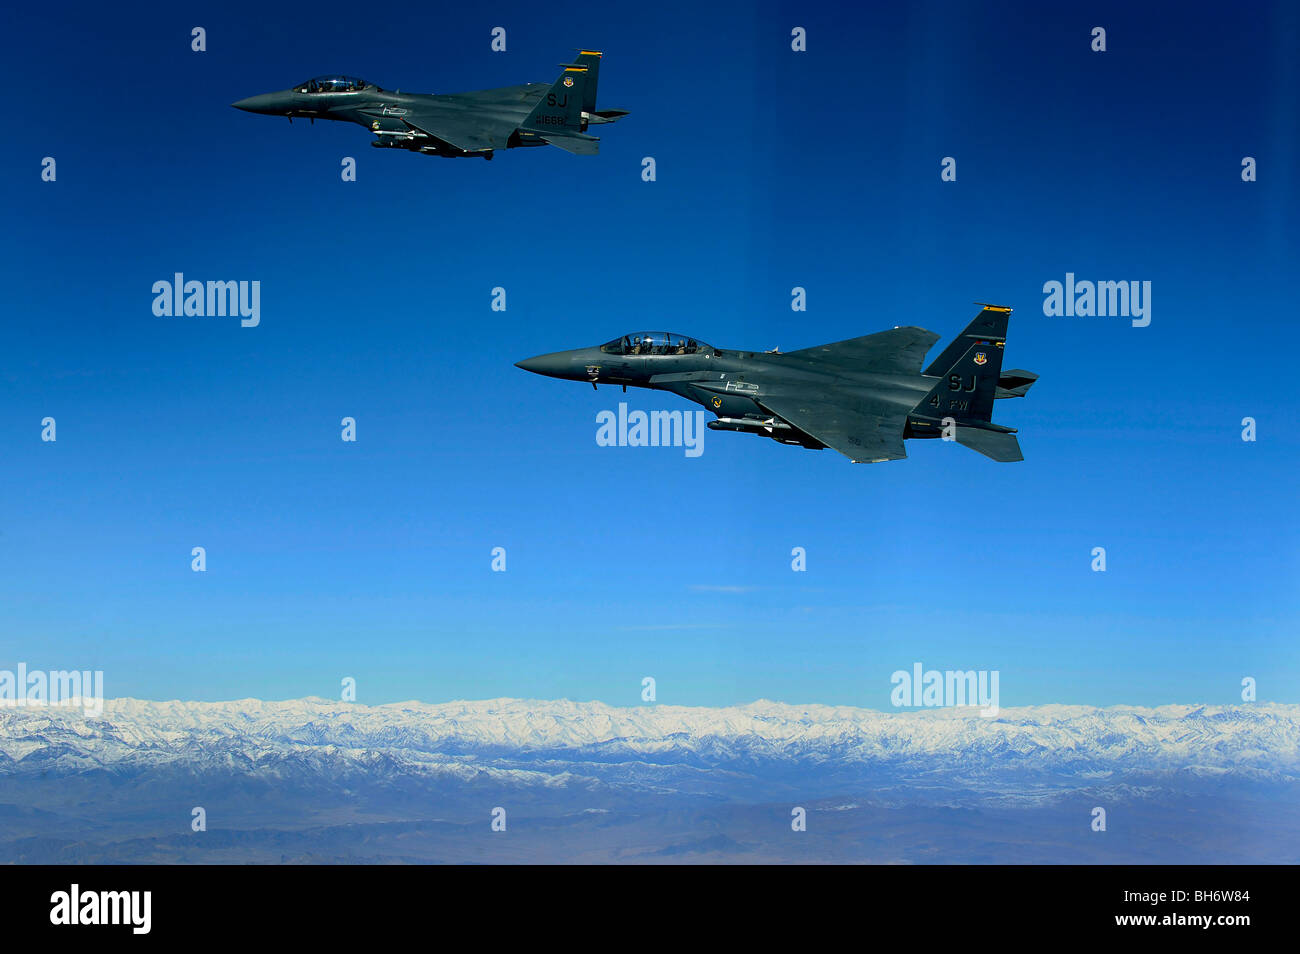 November 26, 2009 - Two U.S. Air Force F-15E Strike Eagles approach a mission objective in eastern Afghanistan. Stock Photo